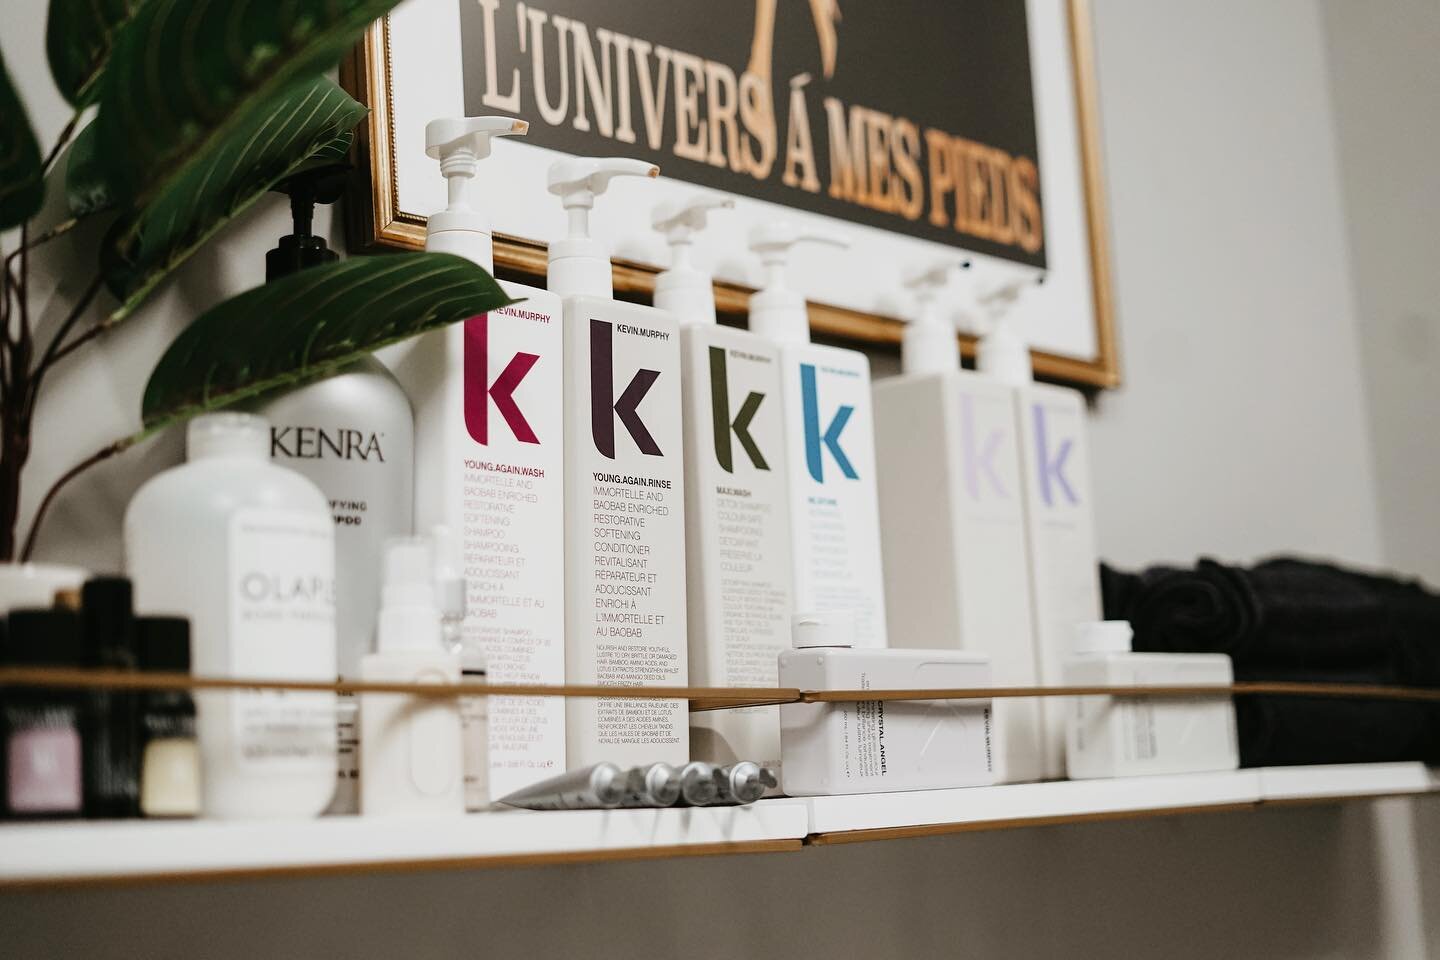 Stock your shelves with the products you love! Keep 100% of your profits! 
&bull;
&bull;
&bull;
&bull;
&bull;
#luxsalonsuites #hairstyles #salonprofessional #cosmetology #blondes #beachwaves #dimension #hair #prospertexas #femaleempowerment #musiccit